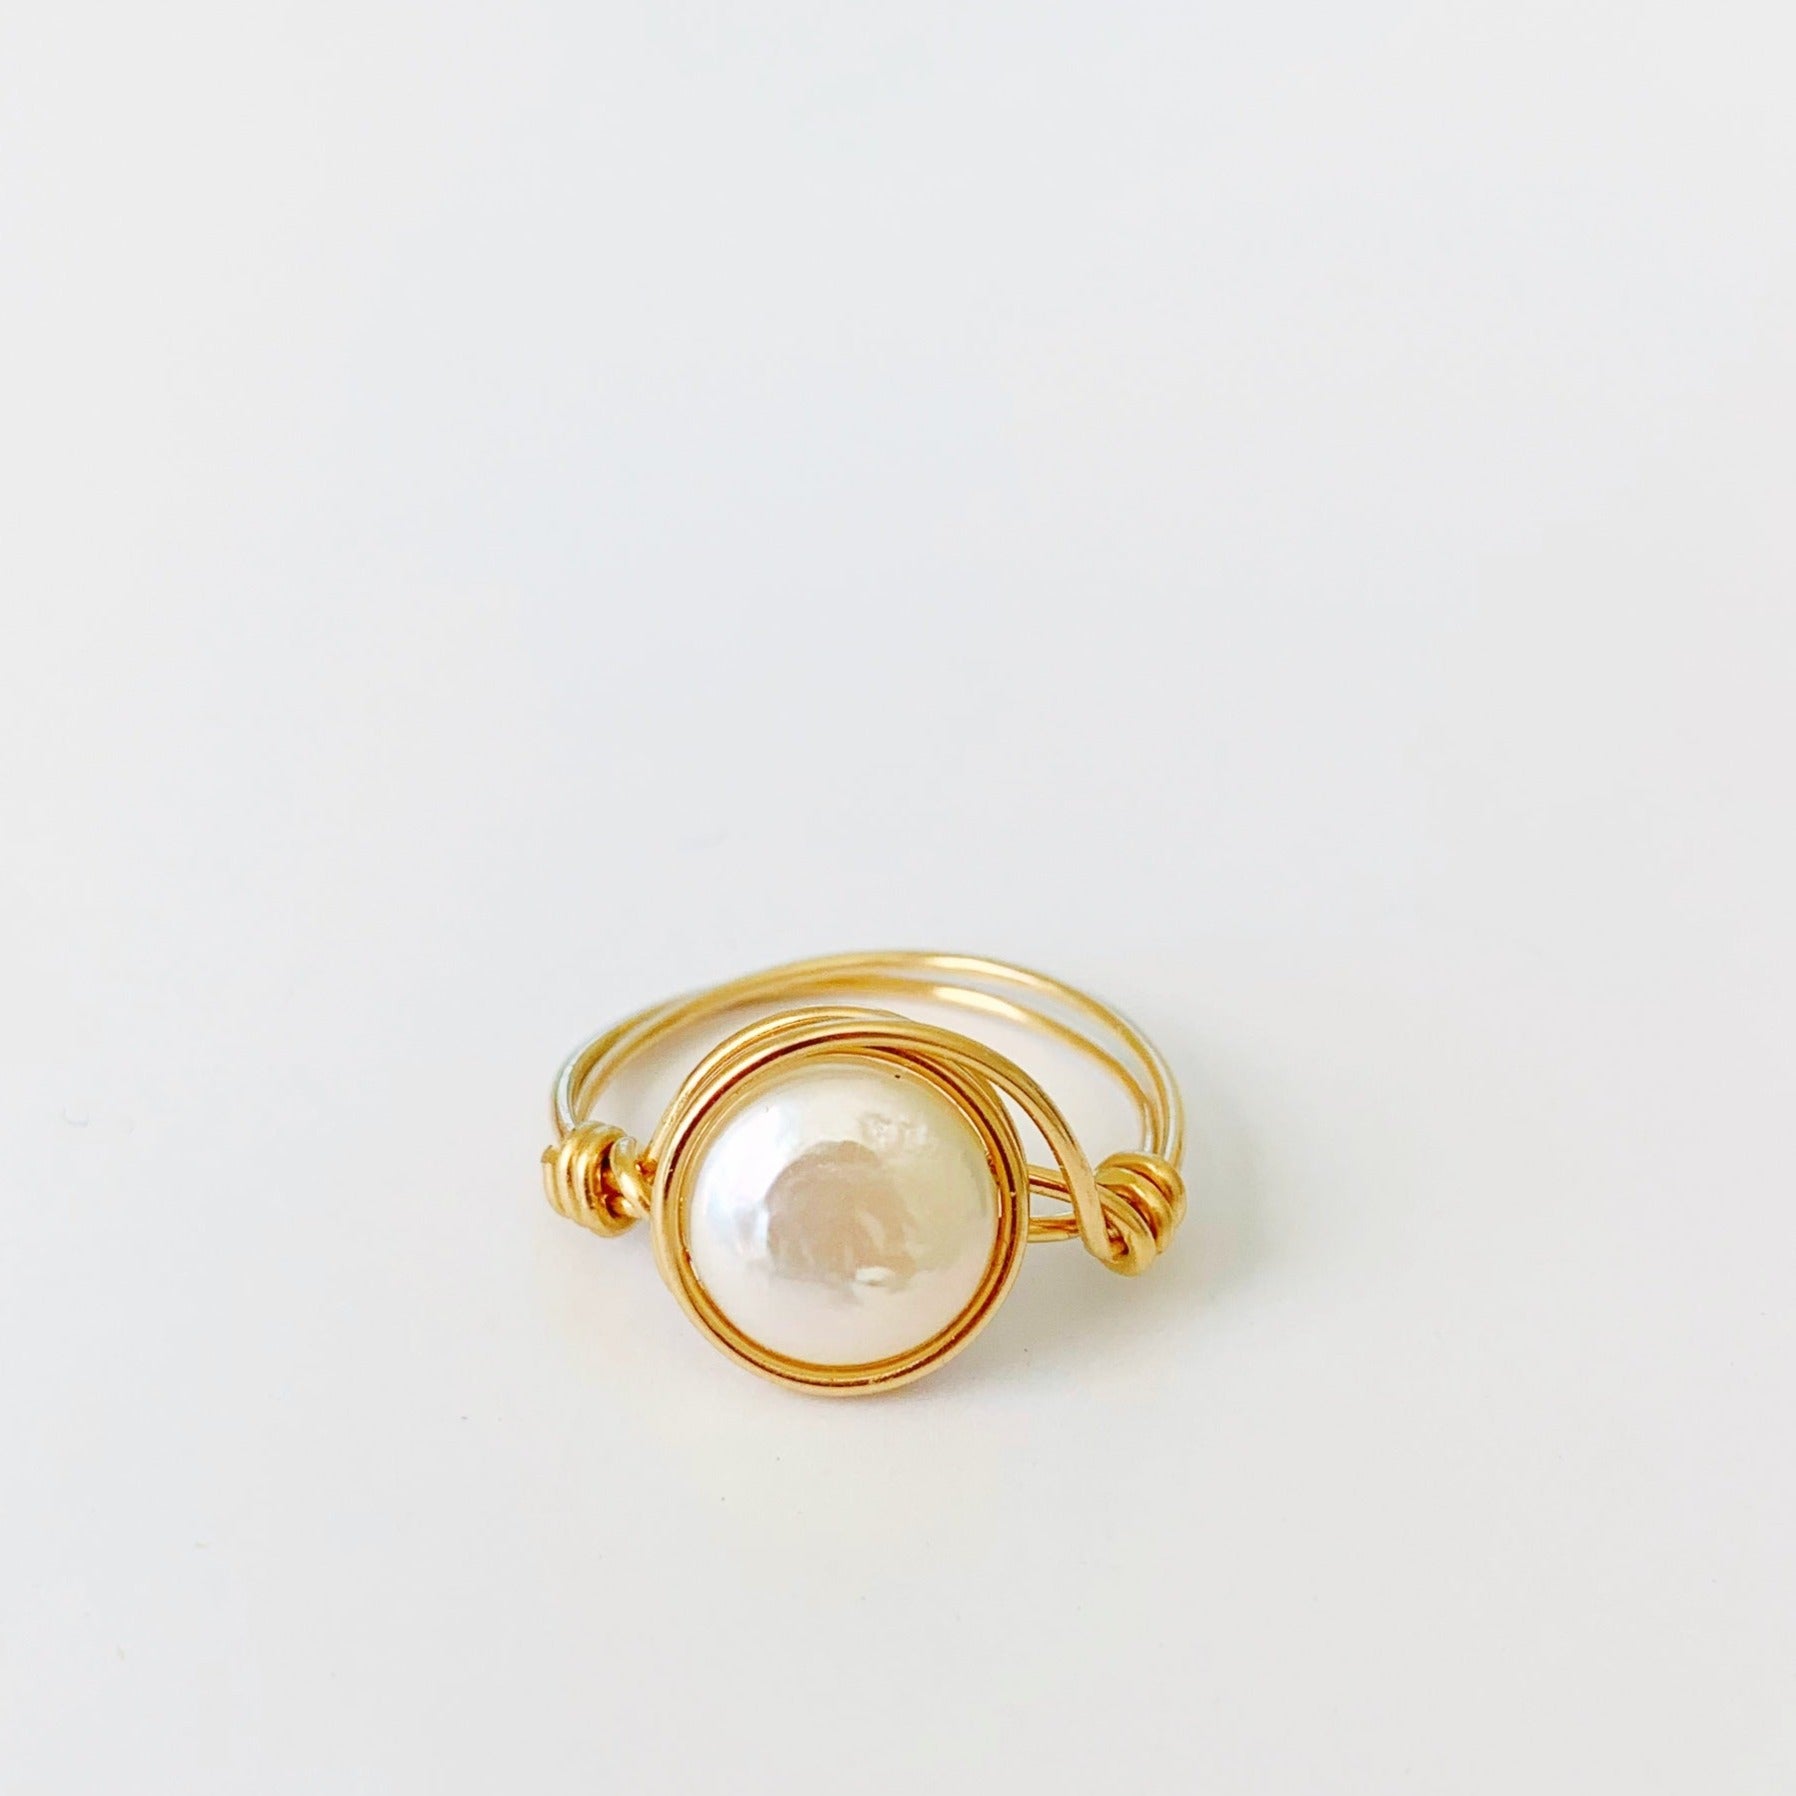 Newport Pearl wire wrapped ring by mermaids and madeleines features 14k gold filled wire and freshwater coin pearl. this ring is photographed on a white backdrop